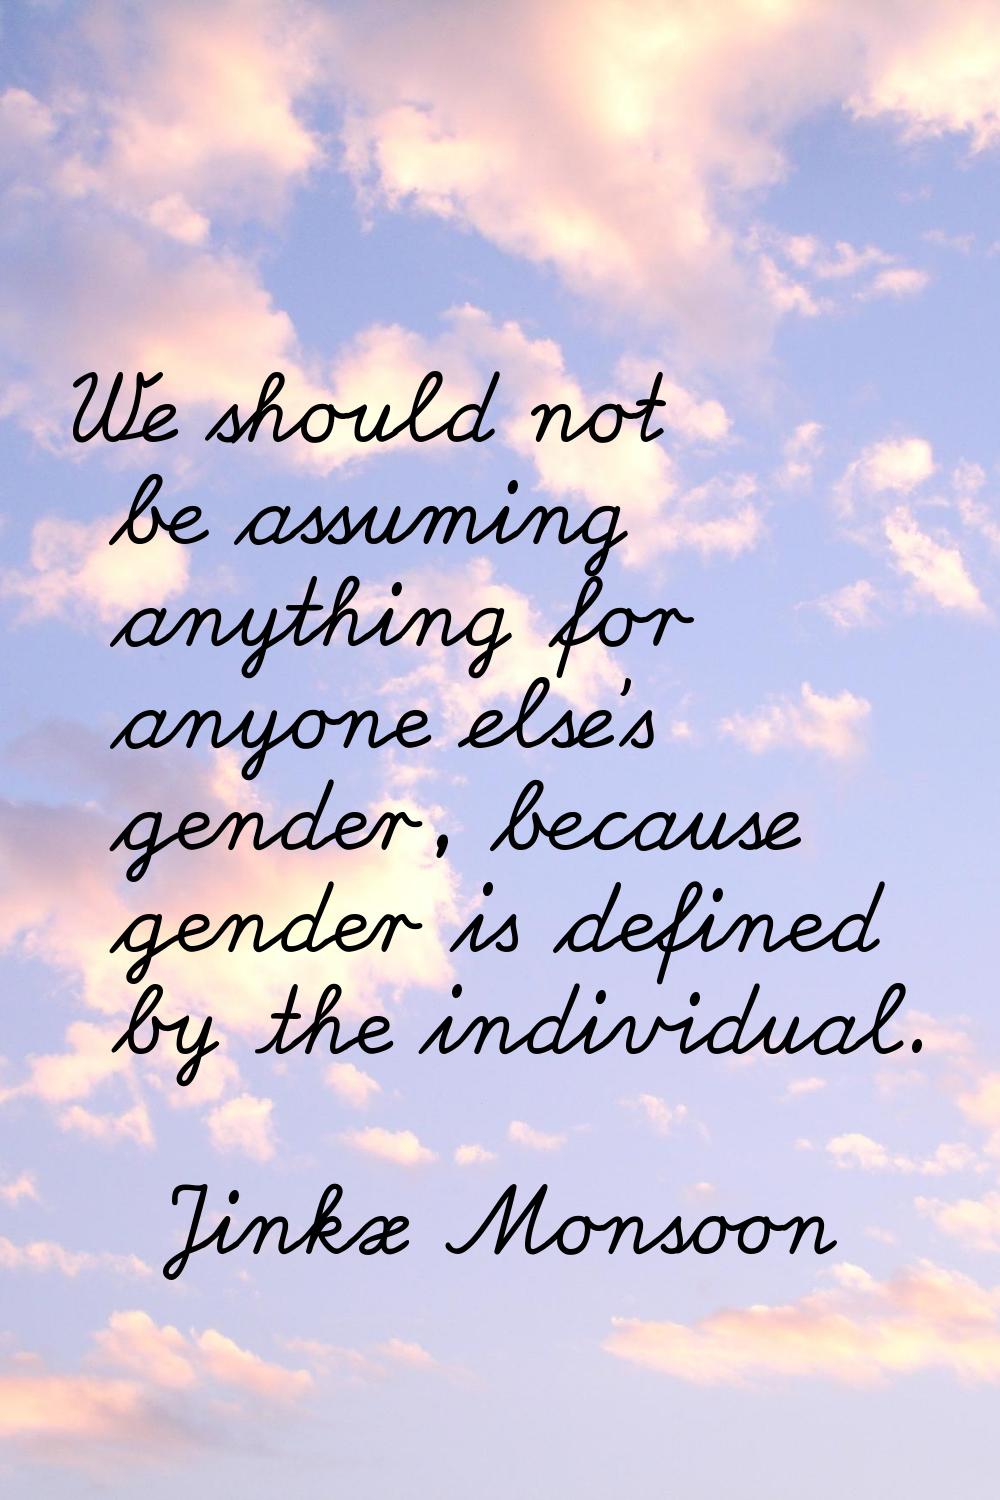 We should not be assuming anything for anyone else's gender, because gender is defined by the indiv